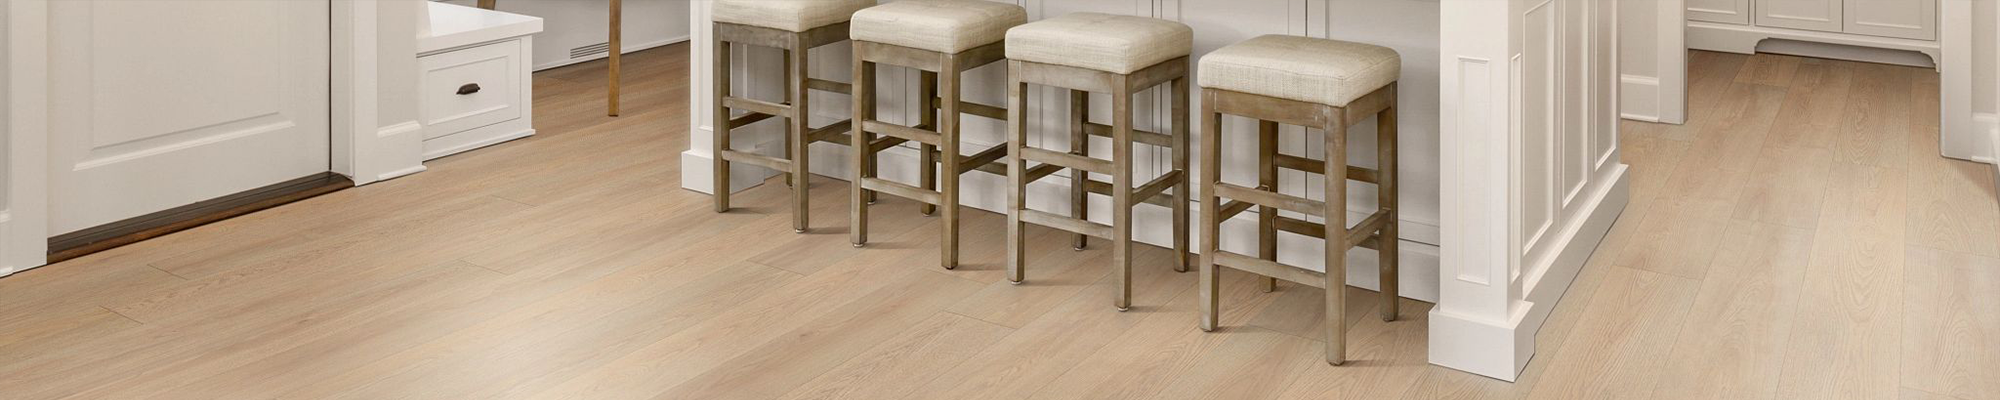 four bar stools at an island in kitchen from Deloreto Flooring Inc in Winter Park